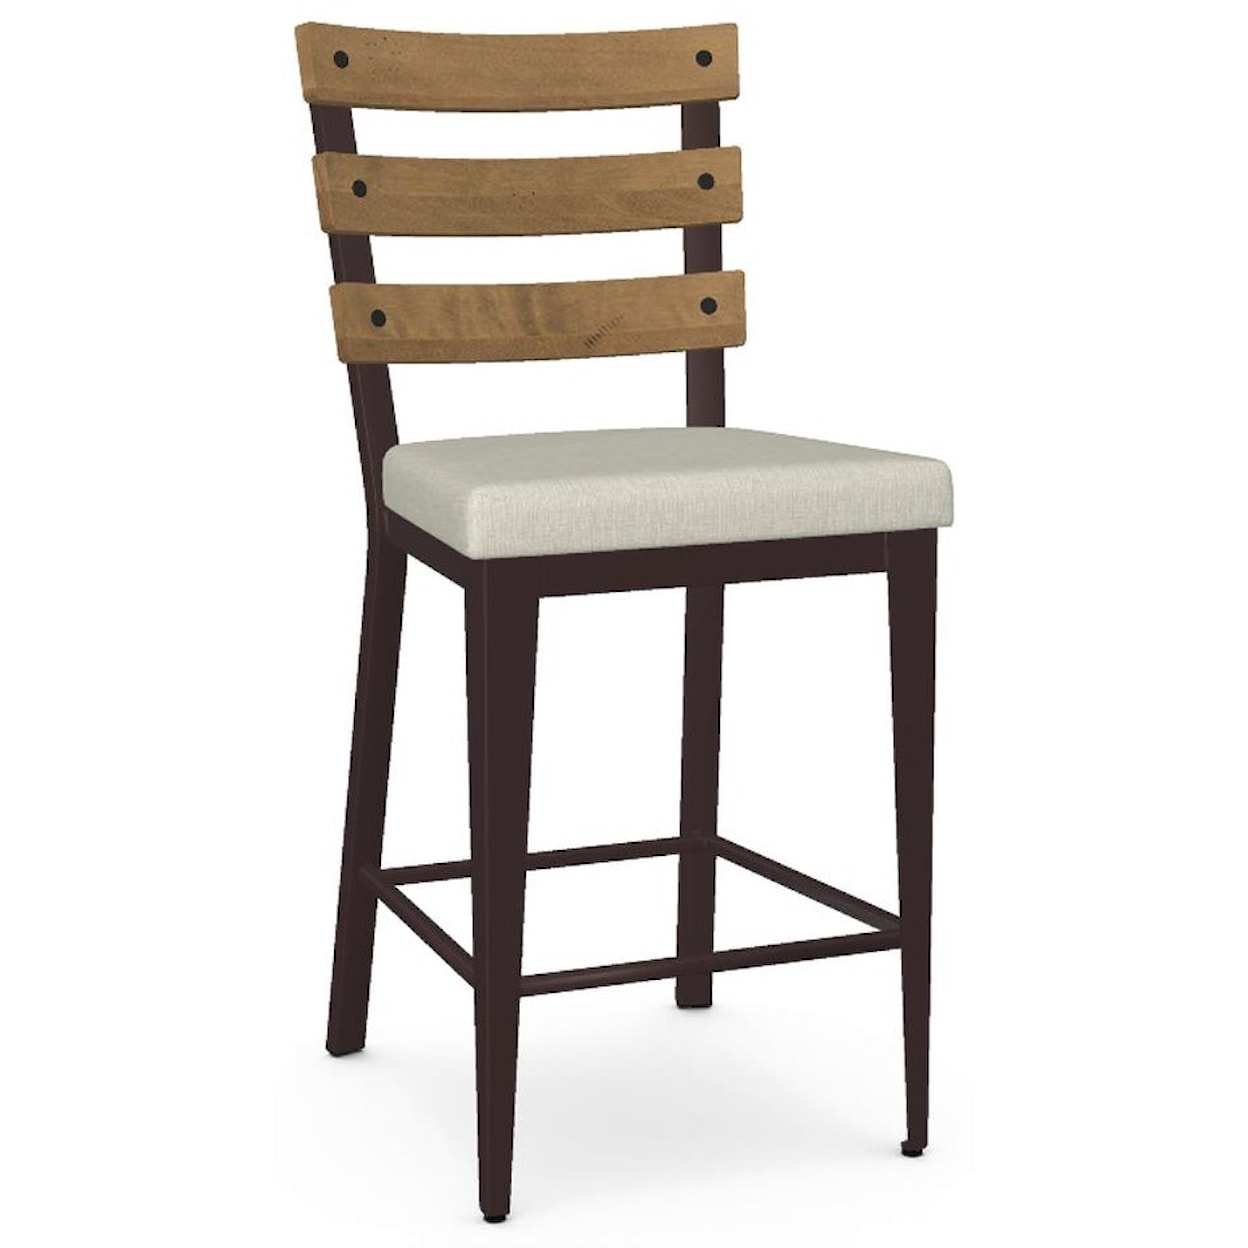 Amisco Industrial 26" Dexter Counter Stool w/ Upholstered Seat